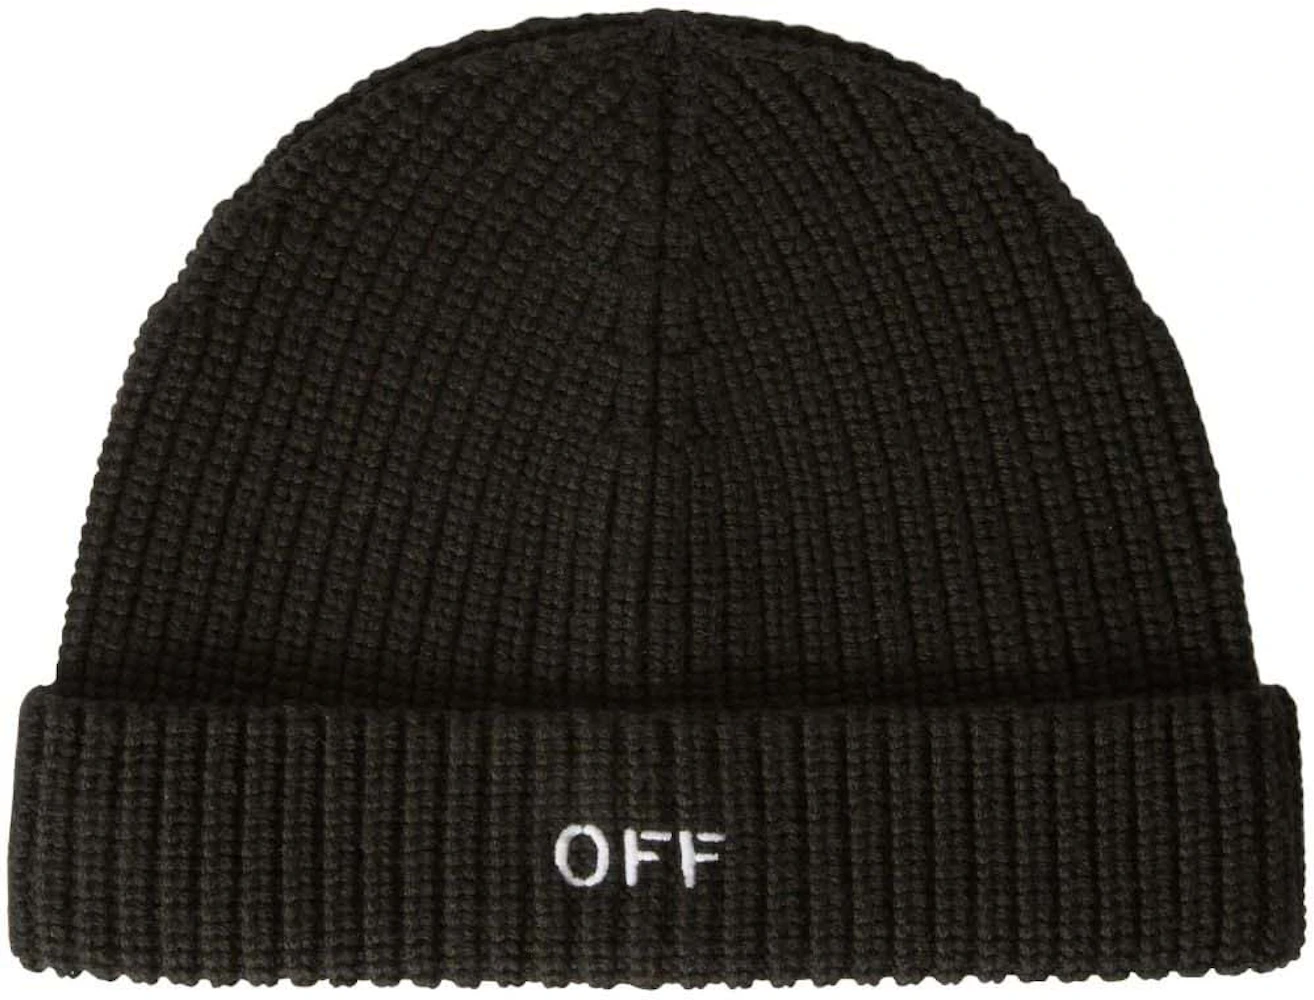 Off-White Embroidered Ribbed-Knit Beanie Black/White in Virgin Wool - US